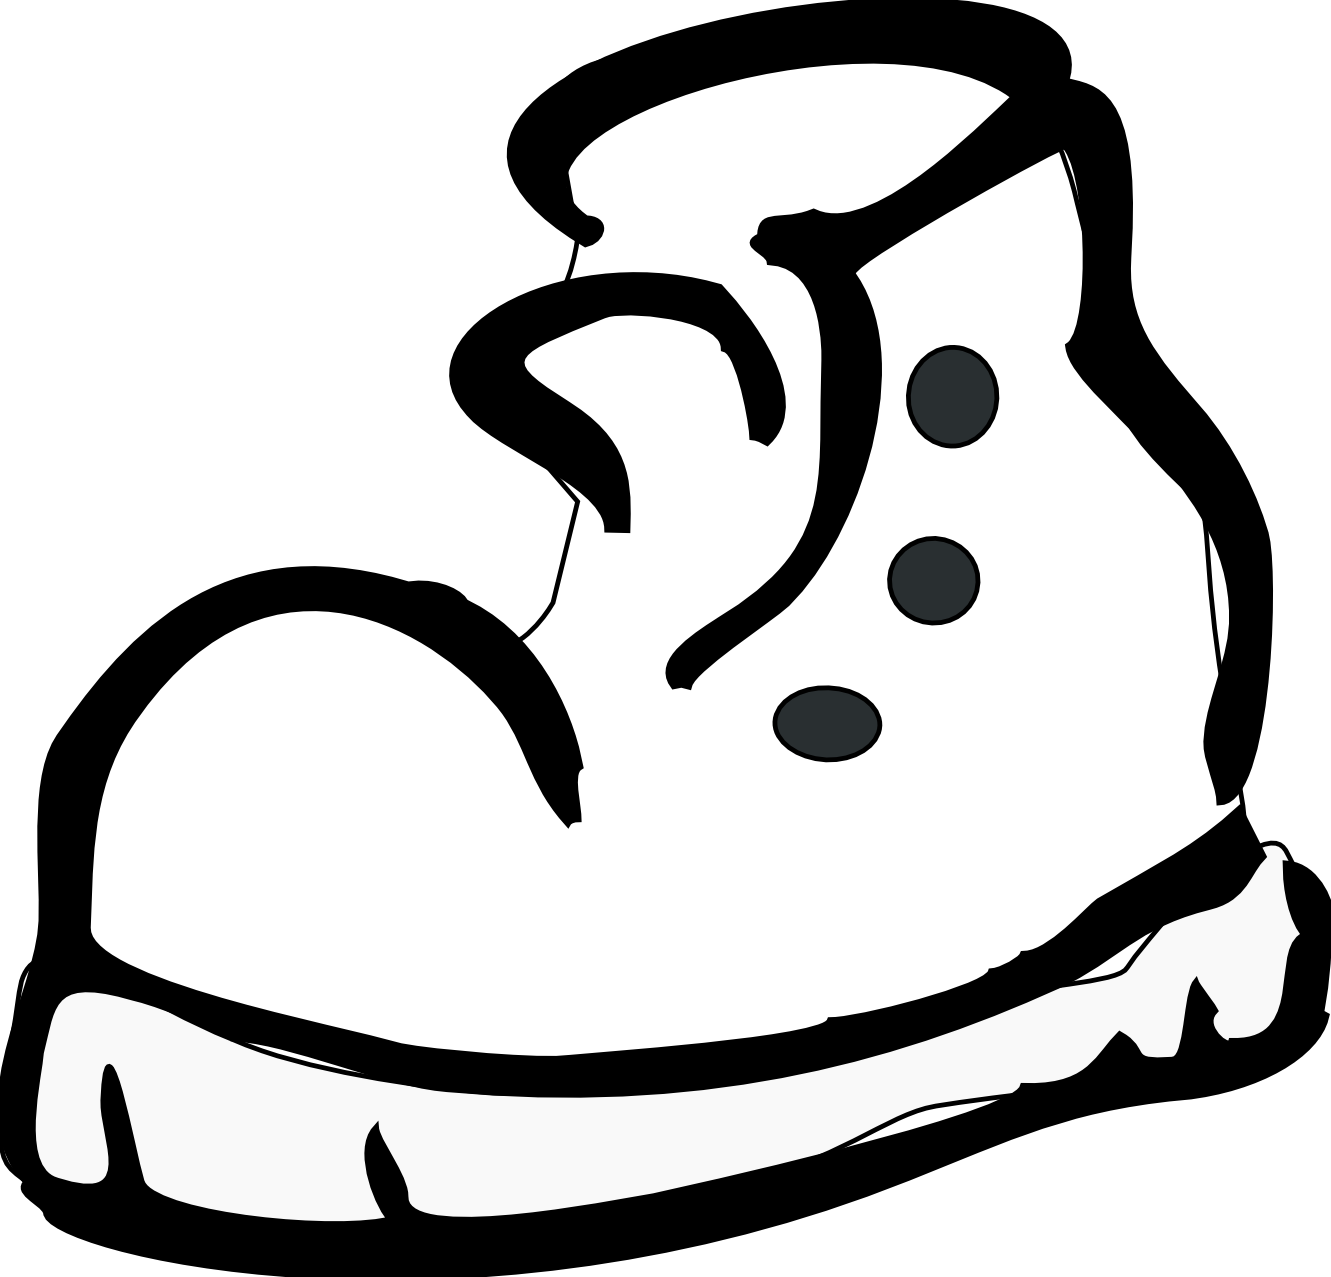 Running Shoes Clipart Black And White | Clipart Panda - Free ...